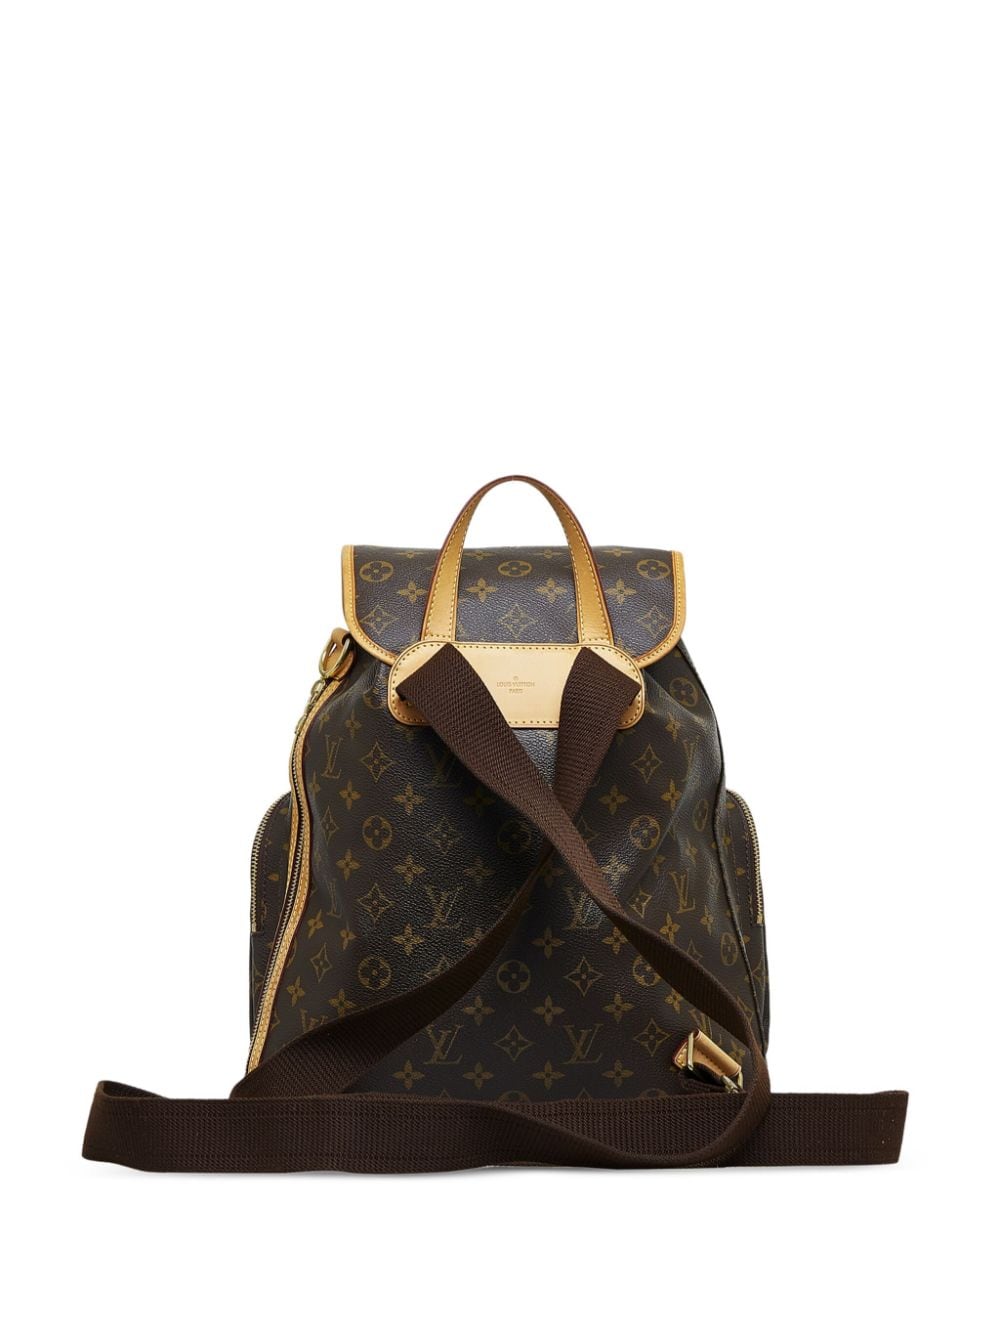 Louis Vuitton 2009 pre-owned Sac A Dos Bosphore backpack - Bruin